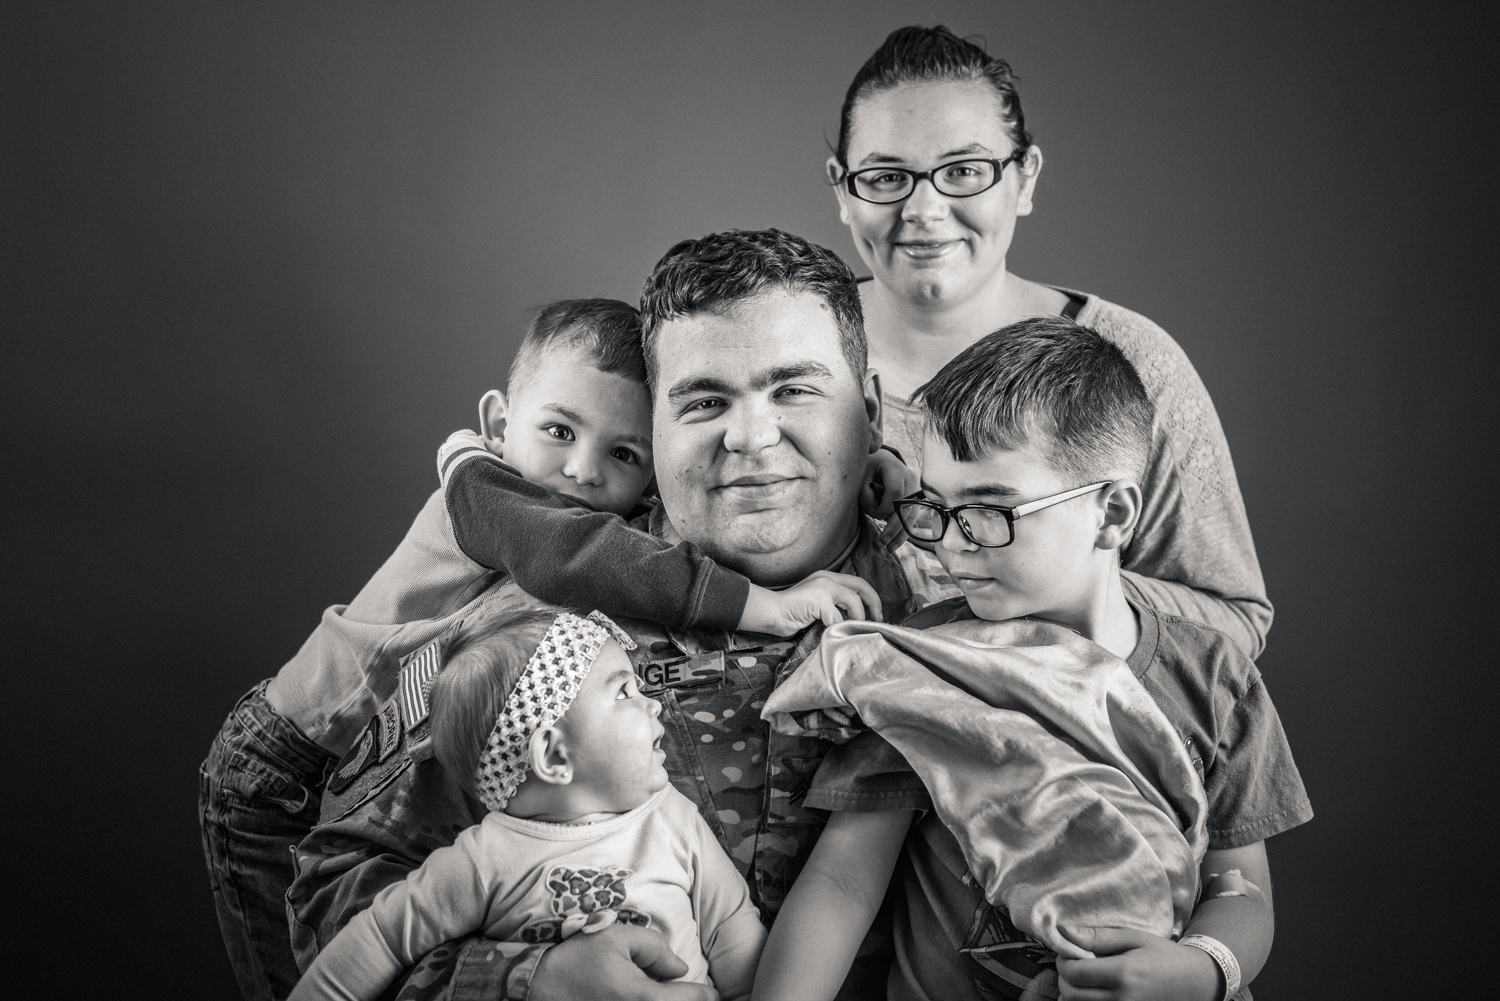 Hugs, military, father, mother, parent, couple with children, childhood, cancer, patient. Together, resilience, authentic, love, sports, fans, Nashville, editorial, documentary, photographer, real people, portrait, advertising, studio